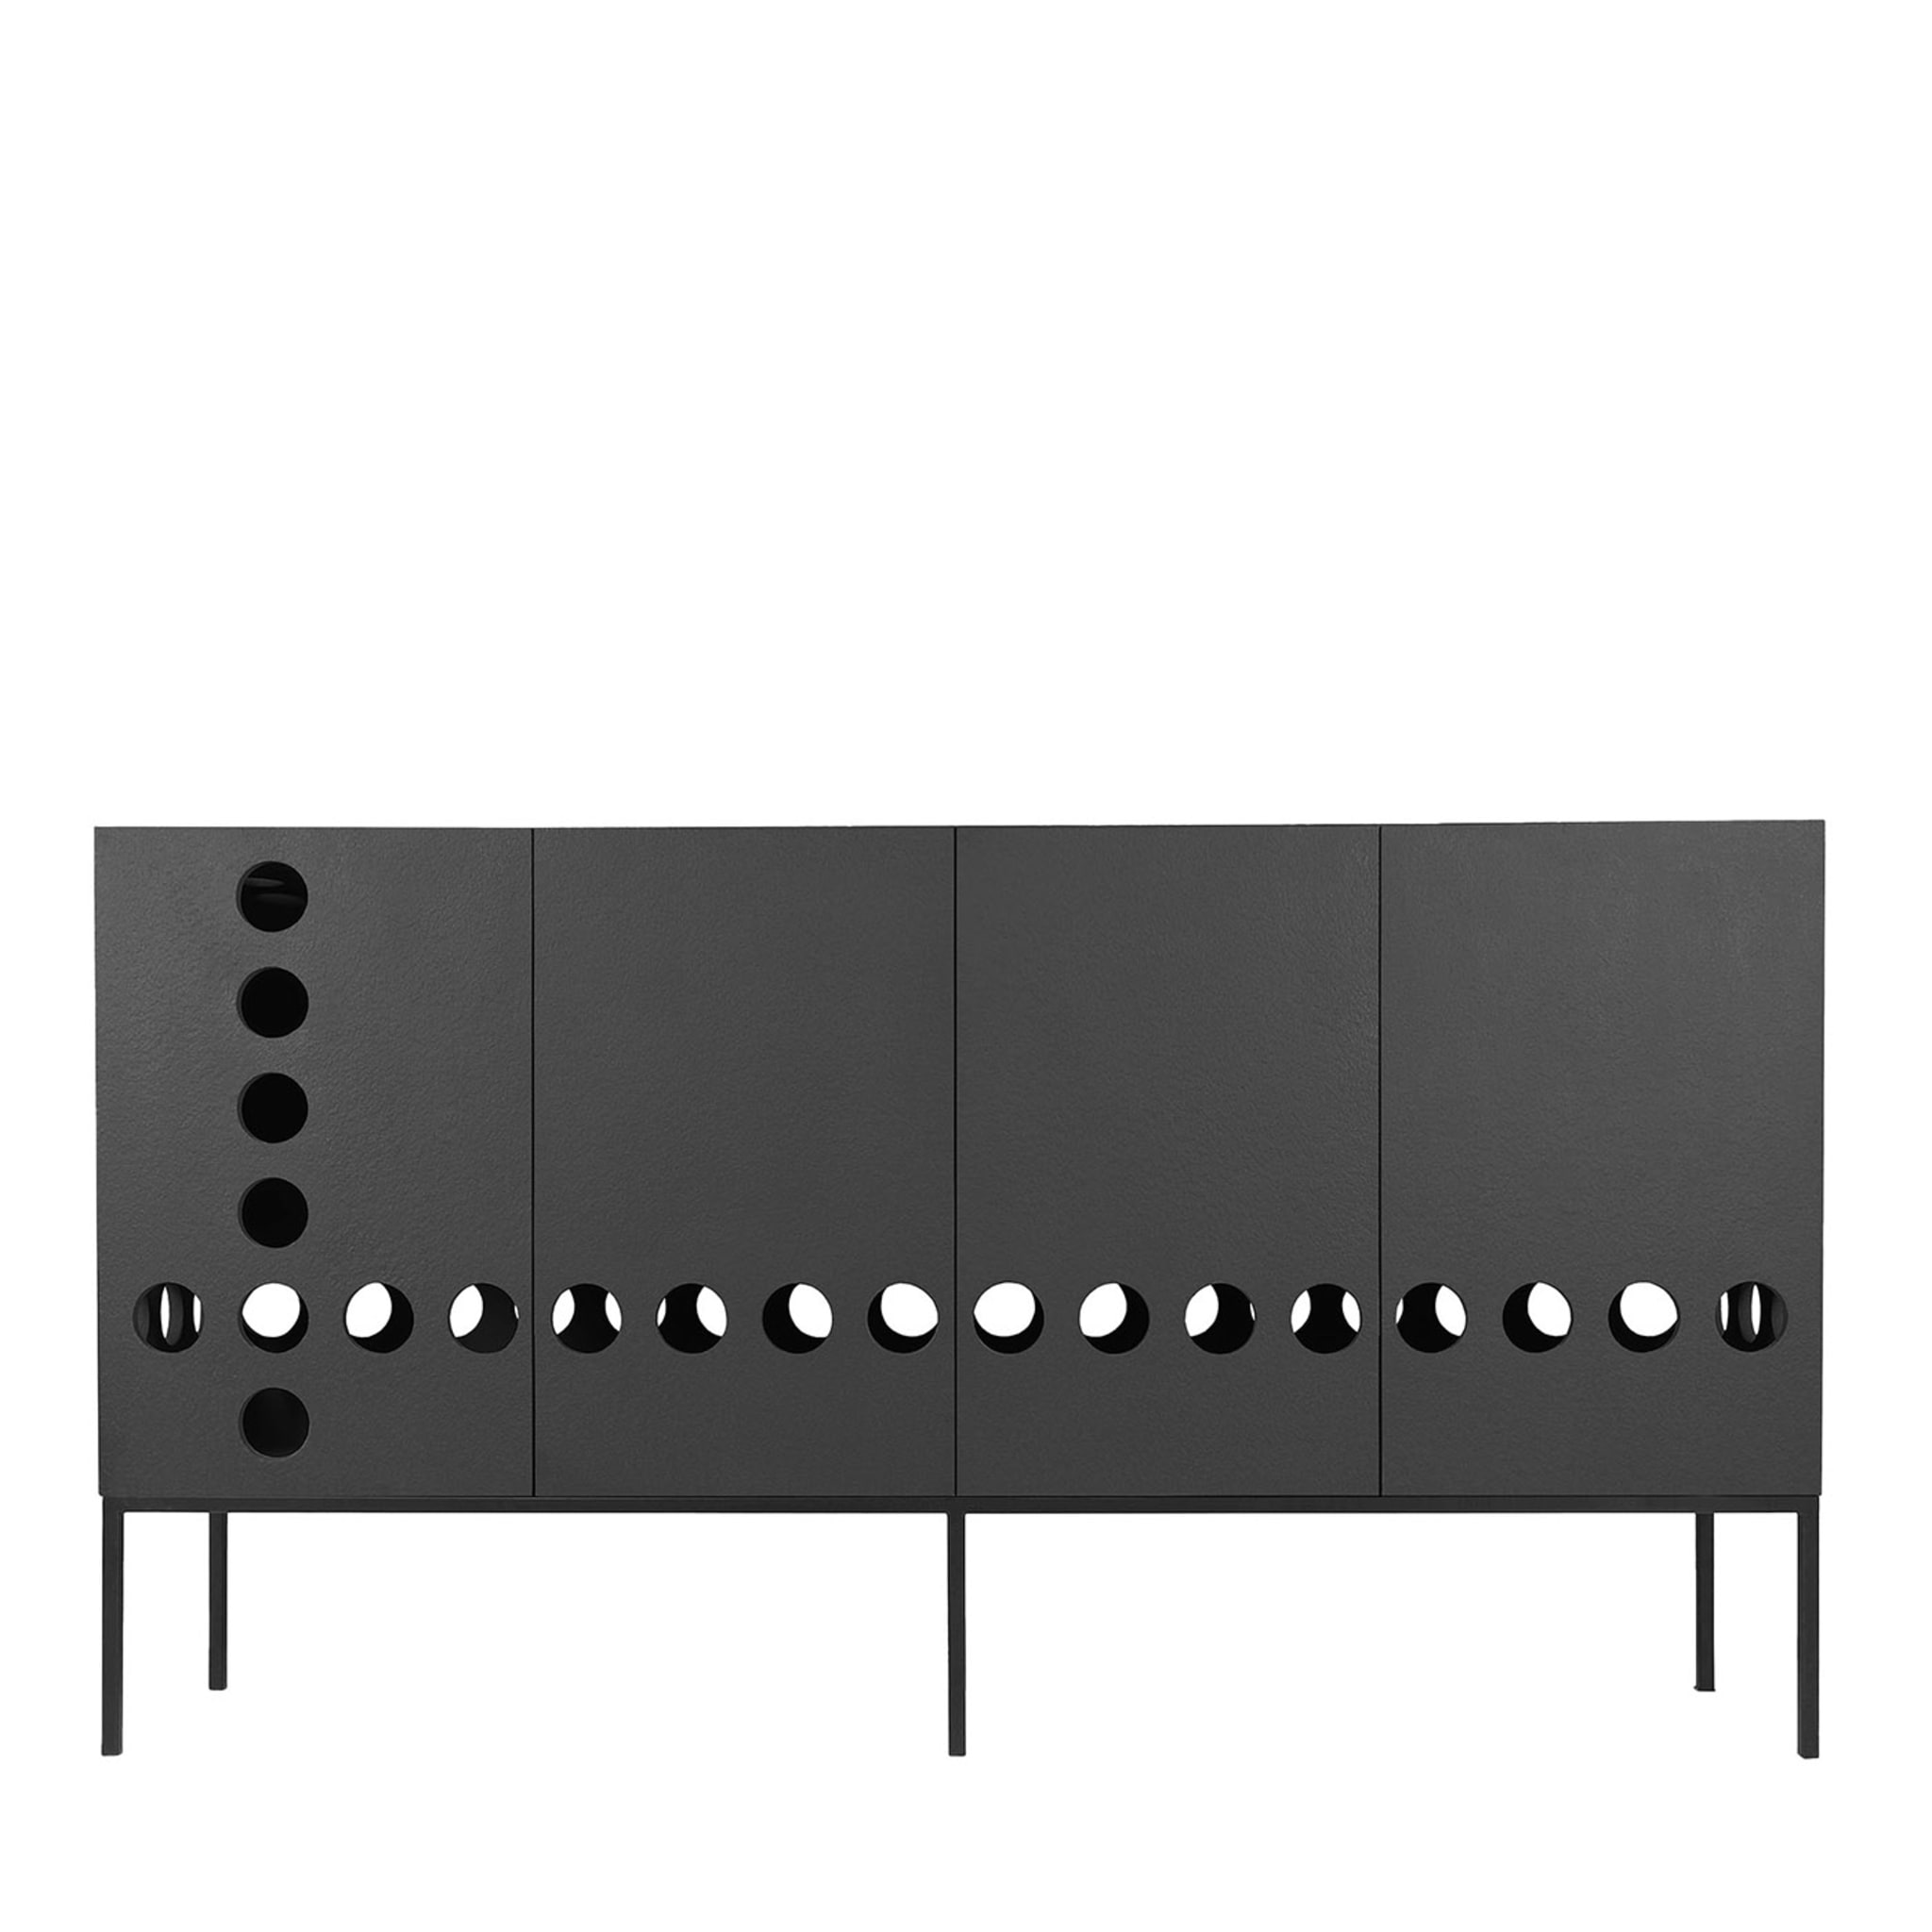 Holed Sideboard #2 by Stefano Mazzucchetti - Main view